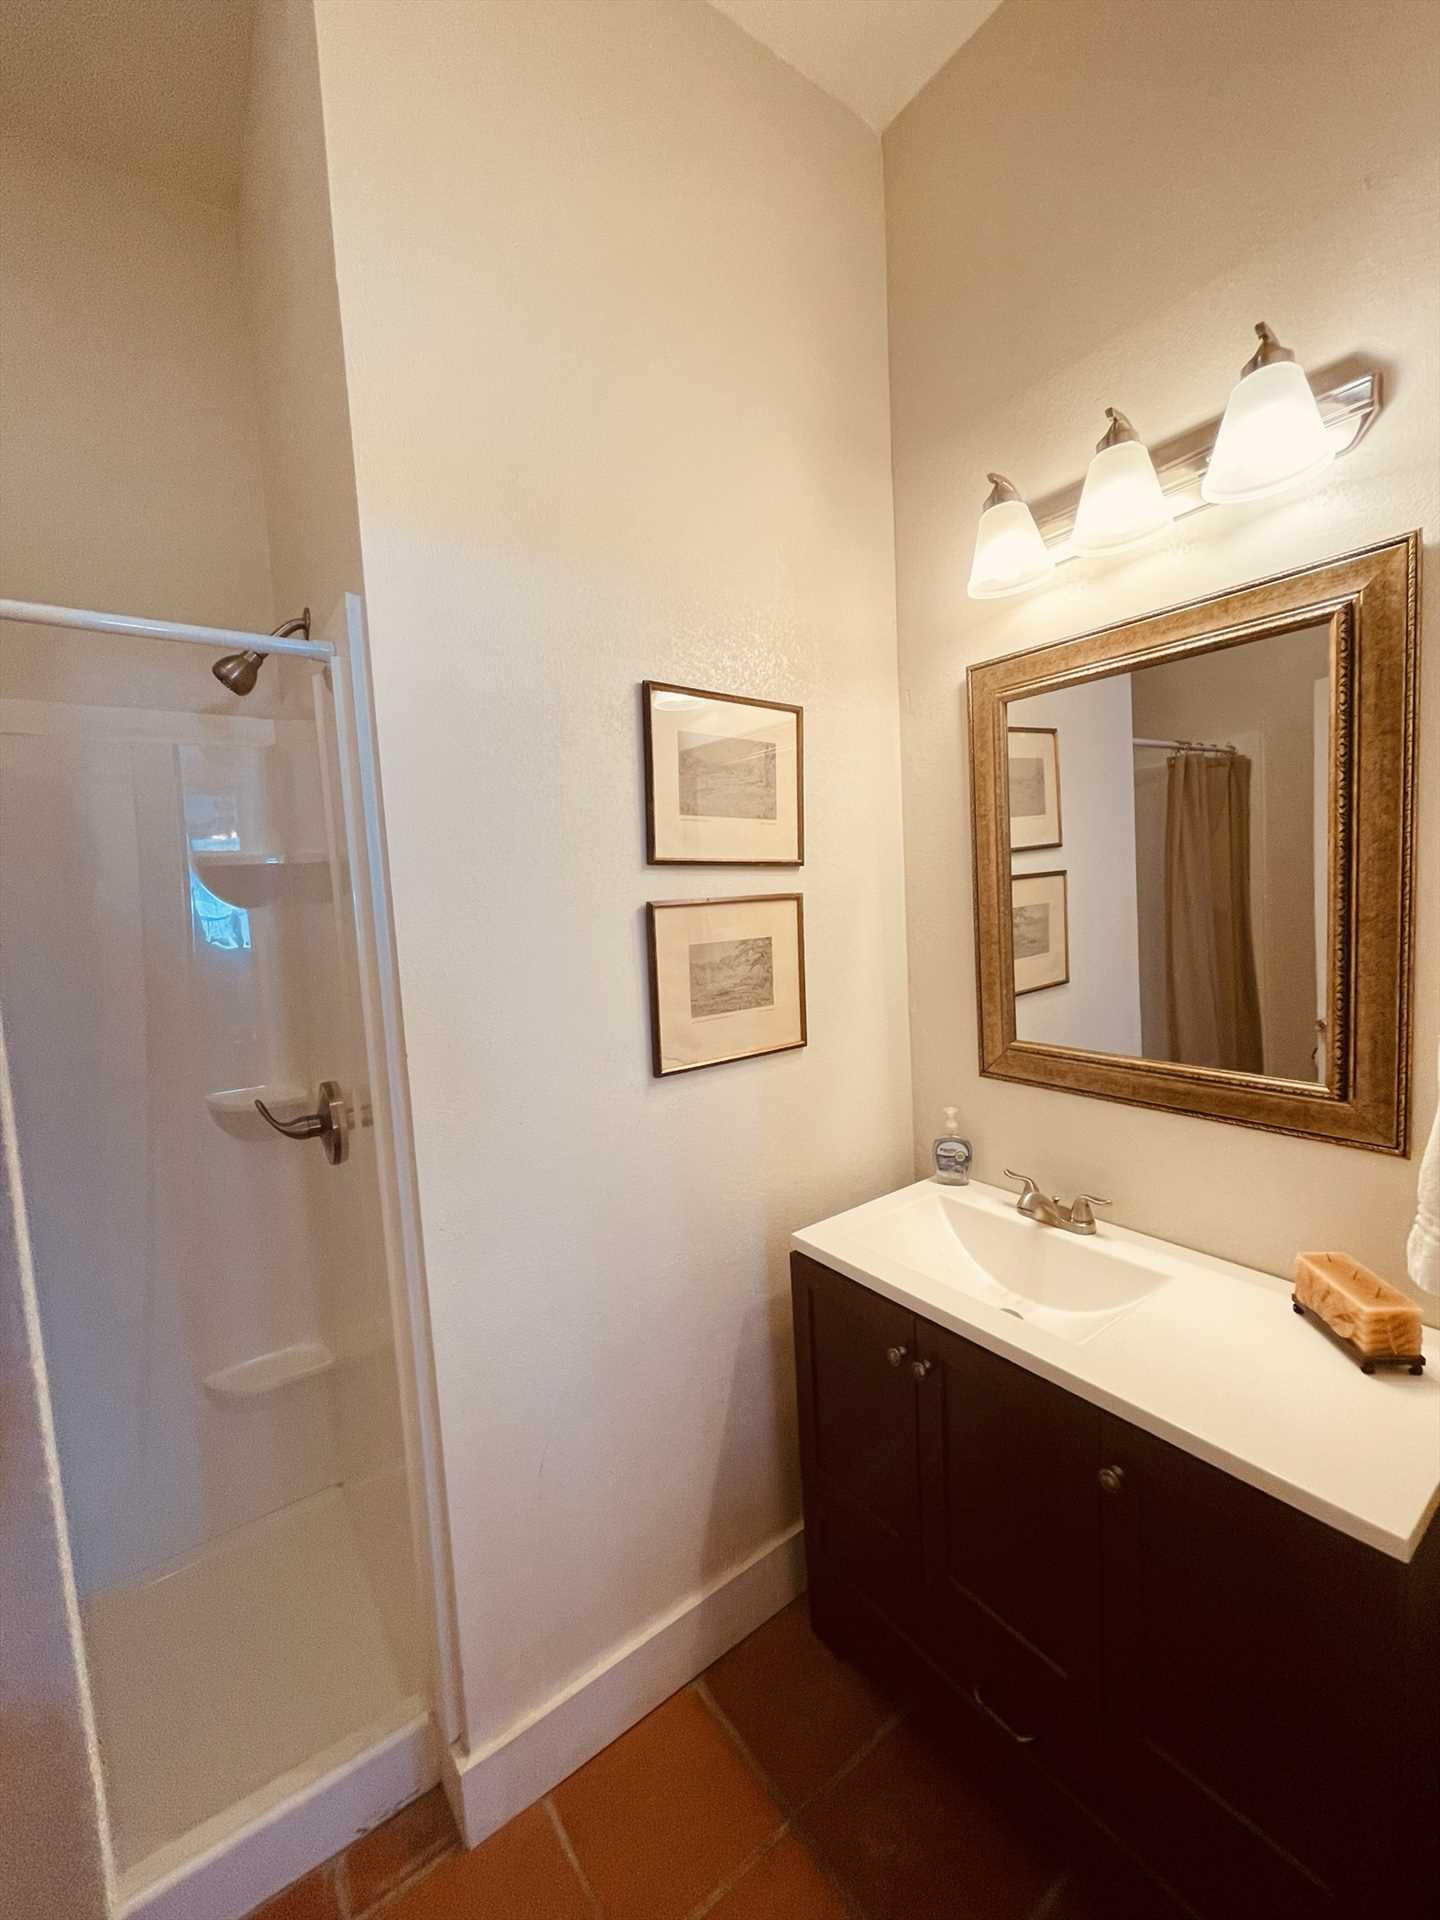                                                 Three full baths at the Lodge make cleaning up easy and quick for everyone! All the fresh linens you'll need are provided, too.